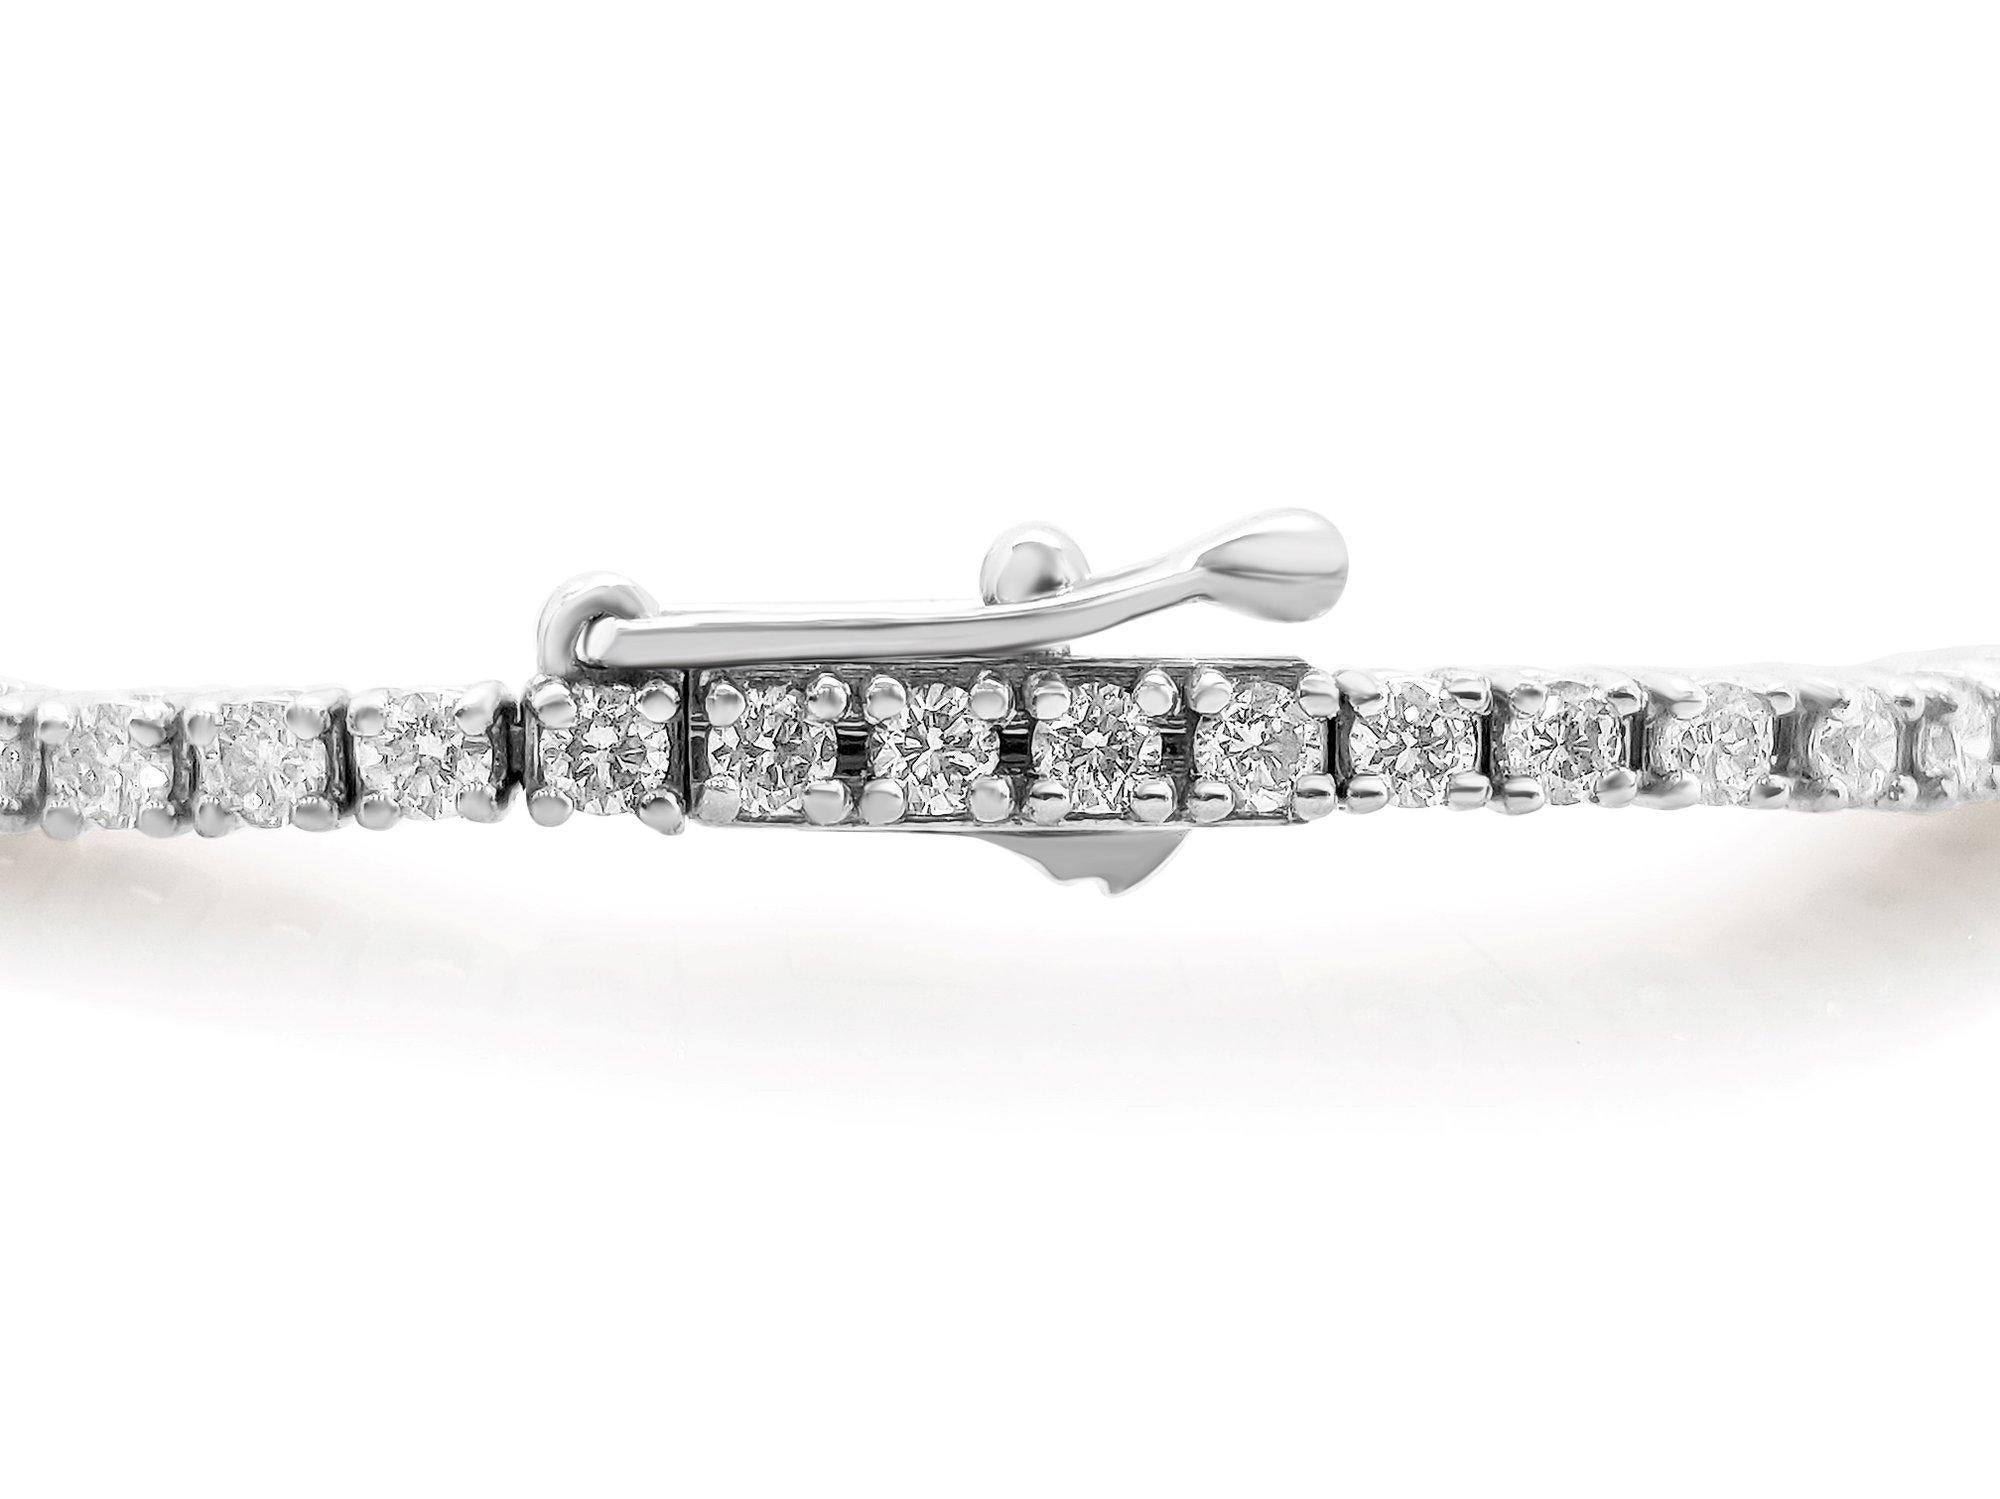 Exclusive diamond tennis bracelet of top quality, E-G Colors and VS1-SI1 clarity.

Side Stones:
___________
Natural Diamonds
Cut: Round Brilliant
Carat: 3.20 cttw / 79 stones
Color: E-G
Clarity: VS1-SI1

Item ships from Israeli Diamonds Exchange,